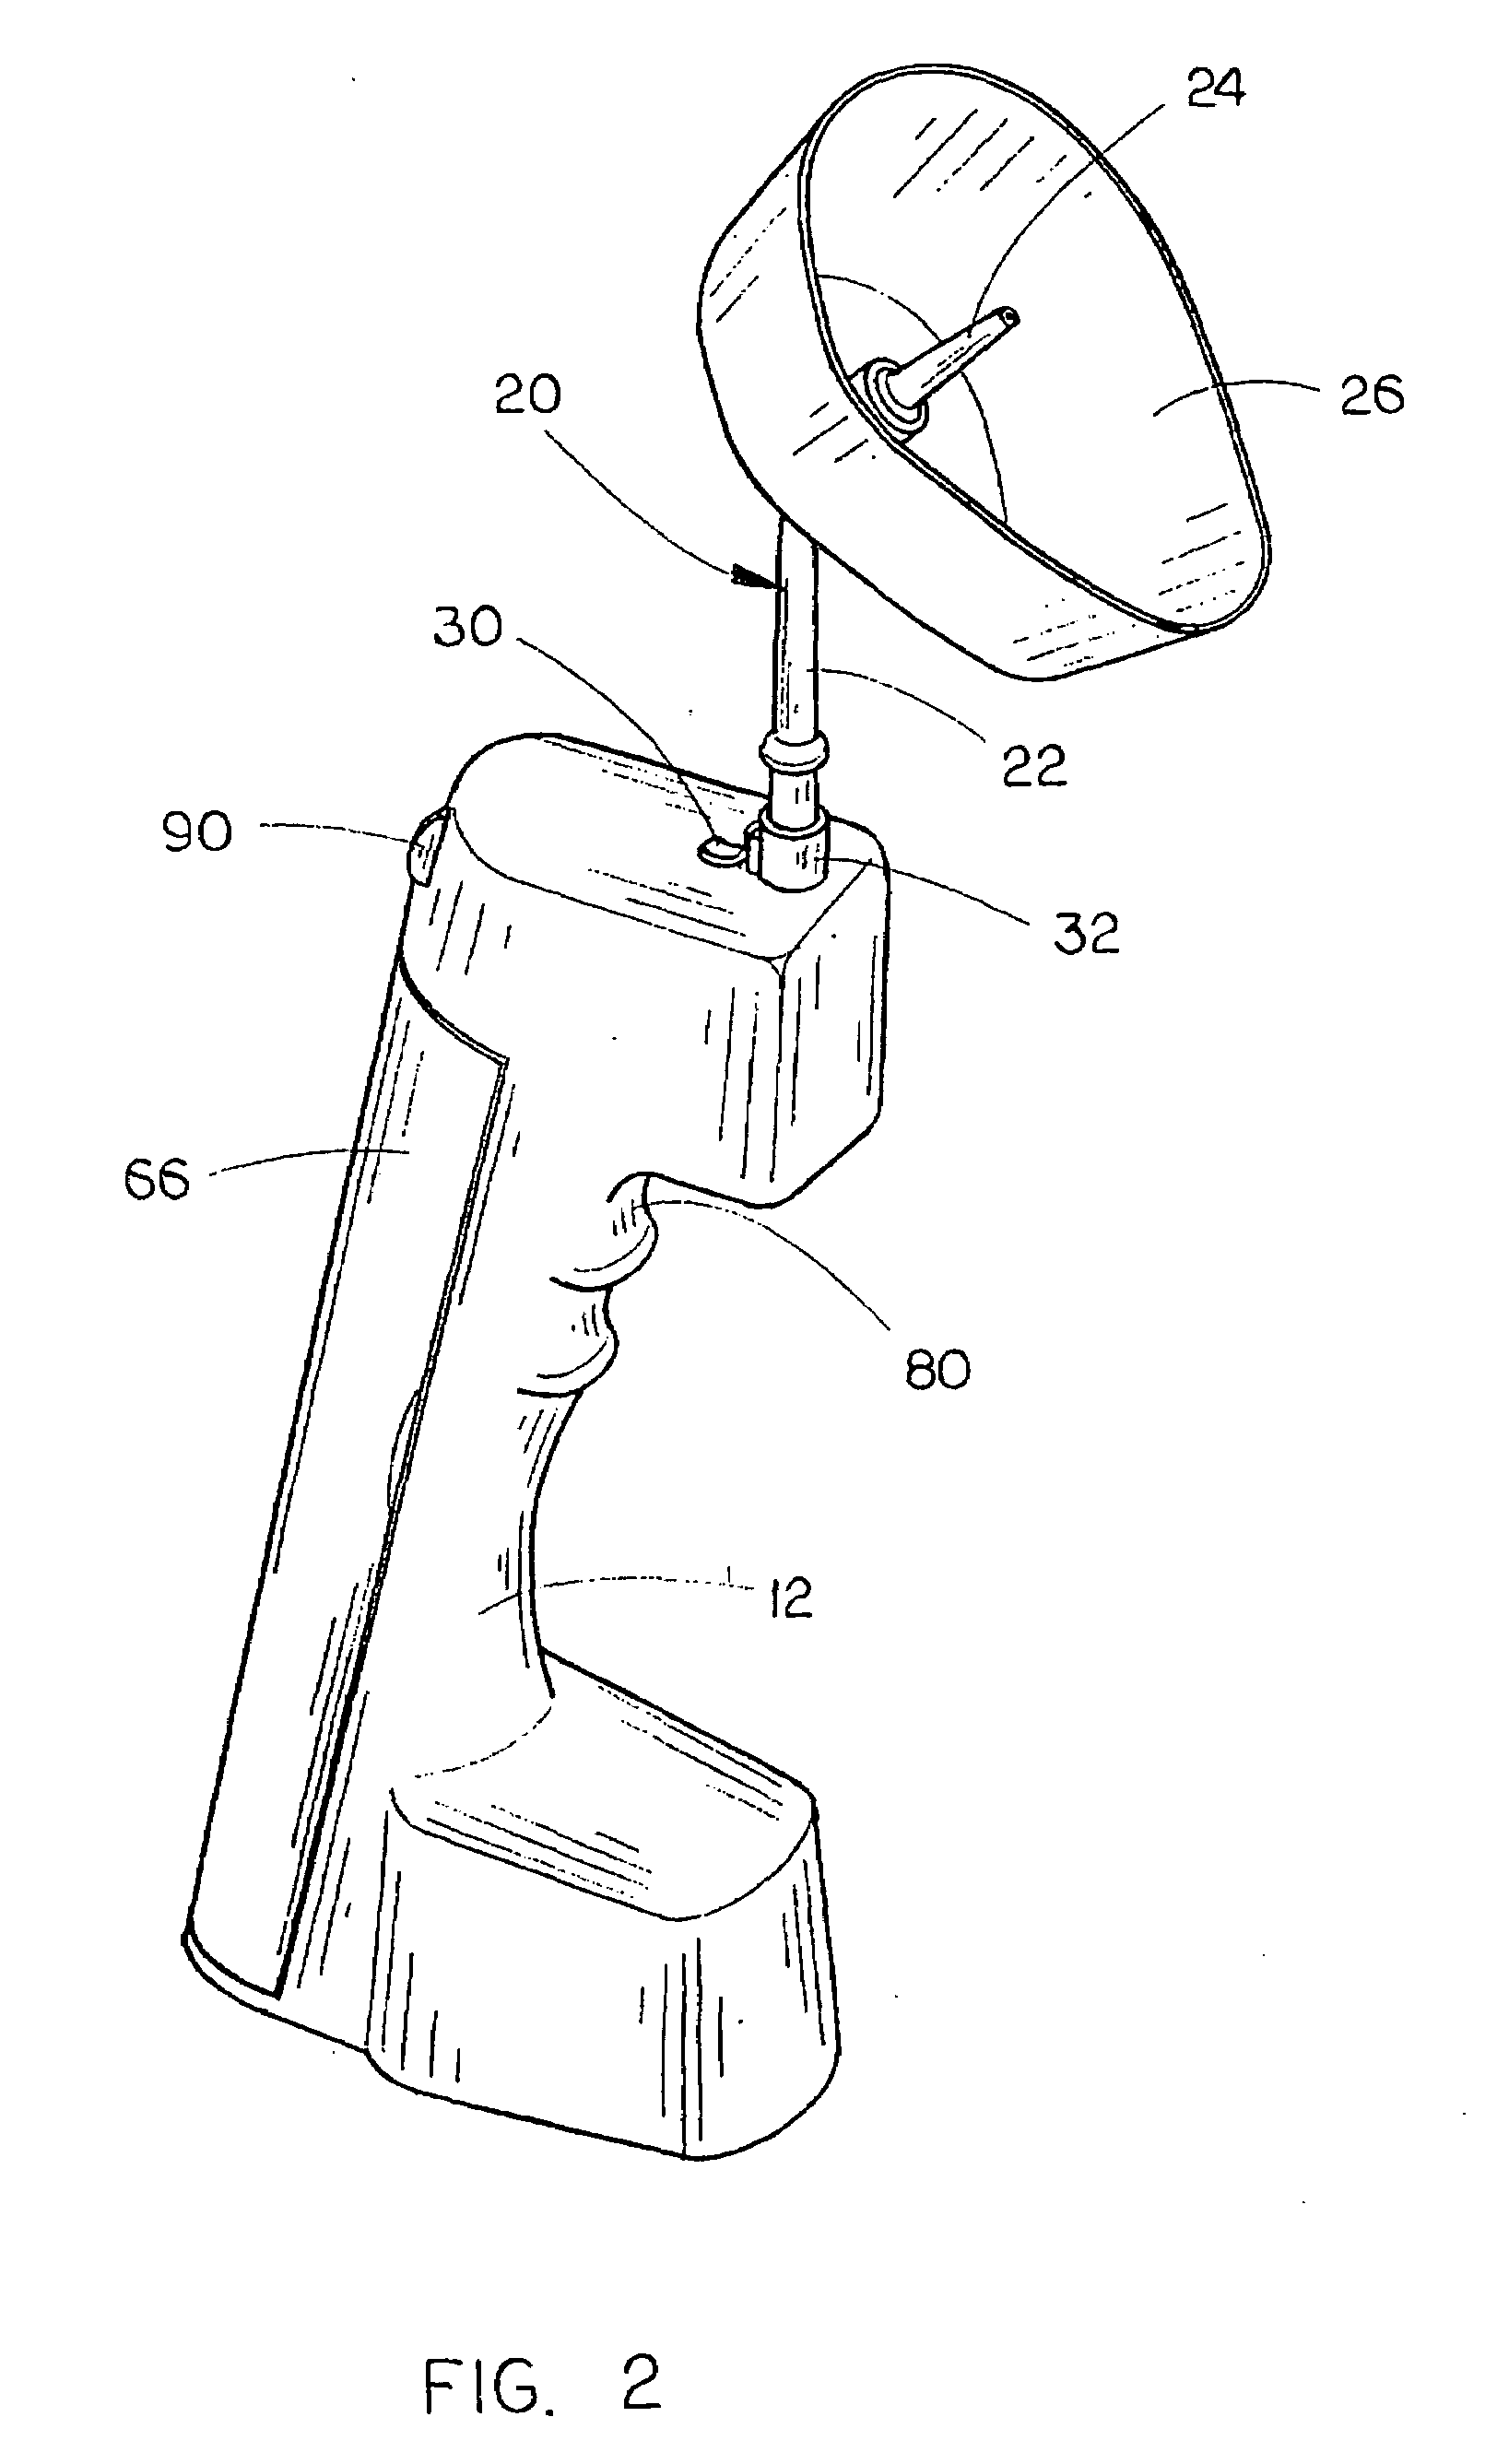 Portable debridement and irrigation device